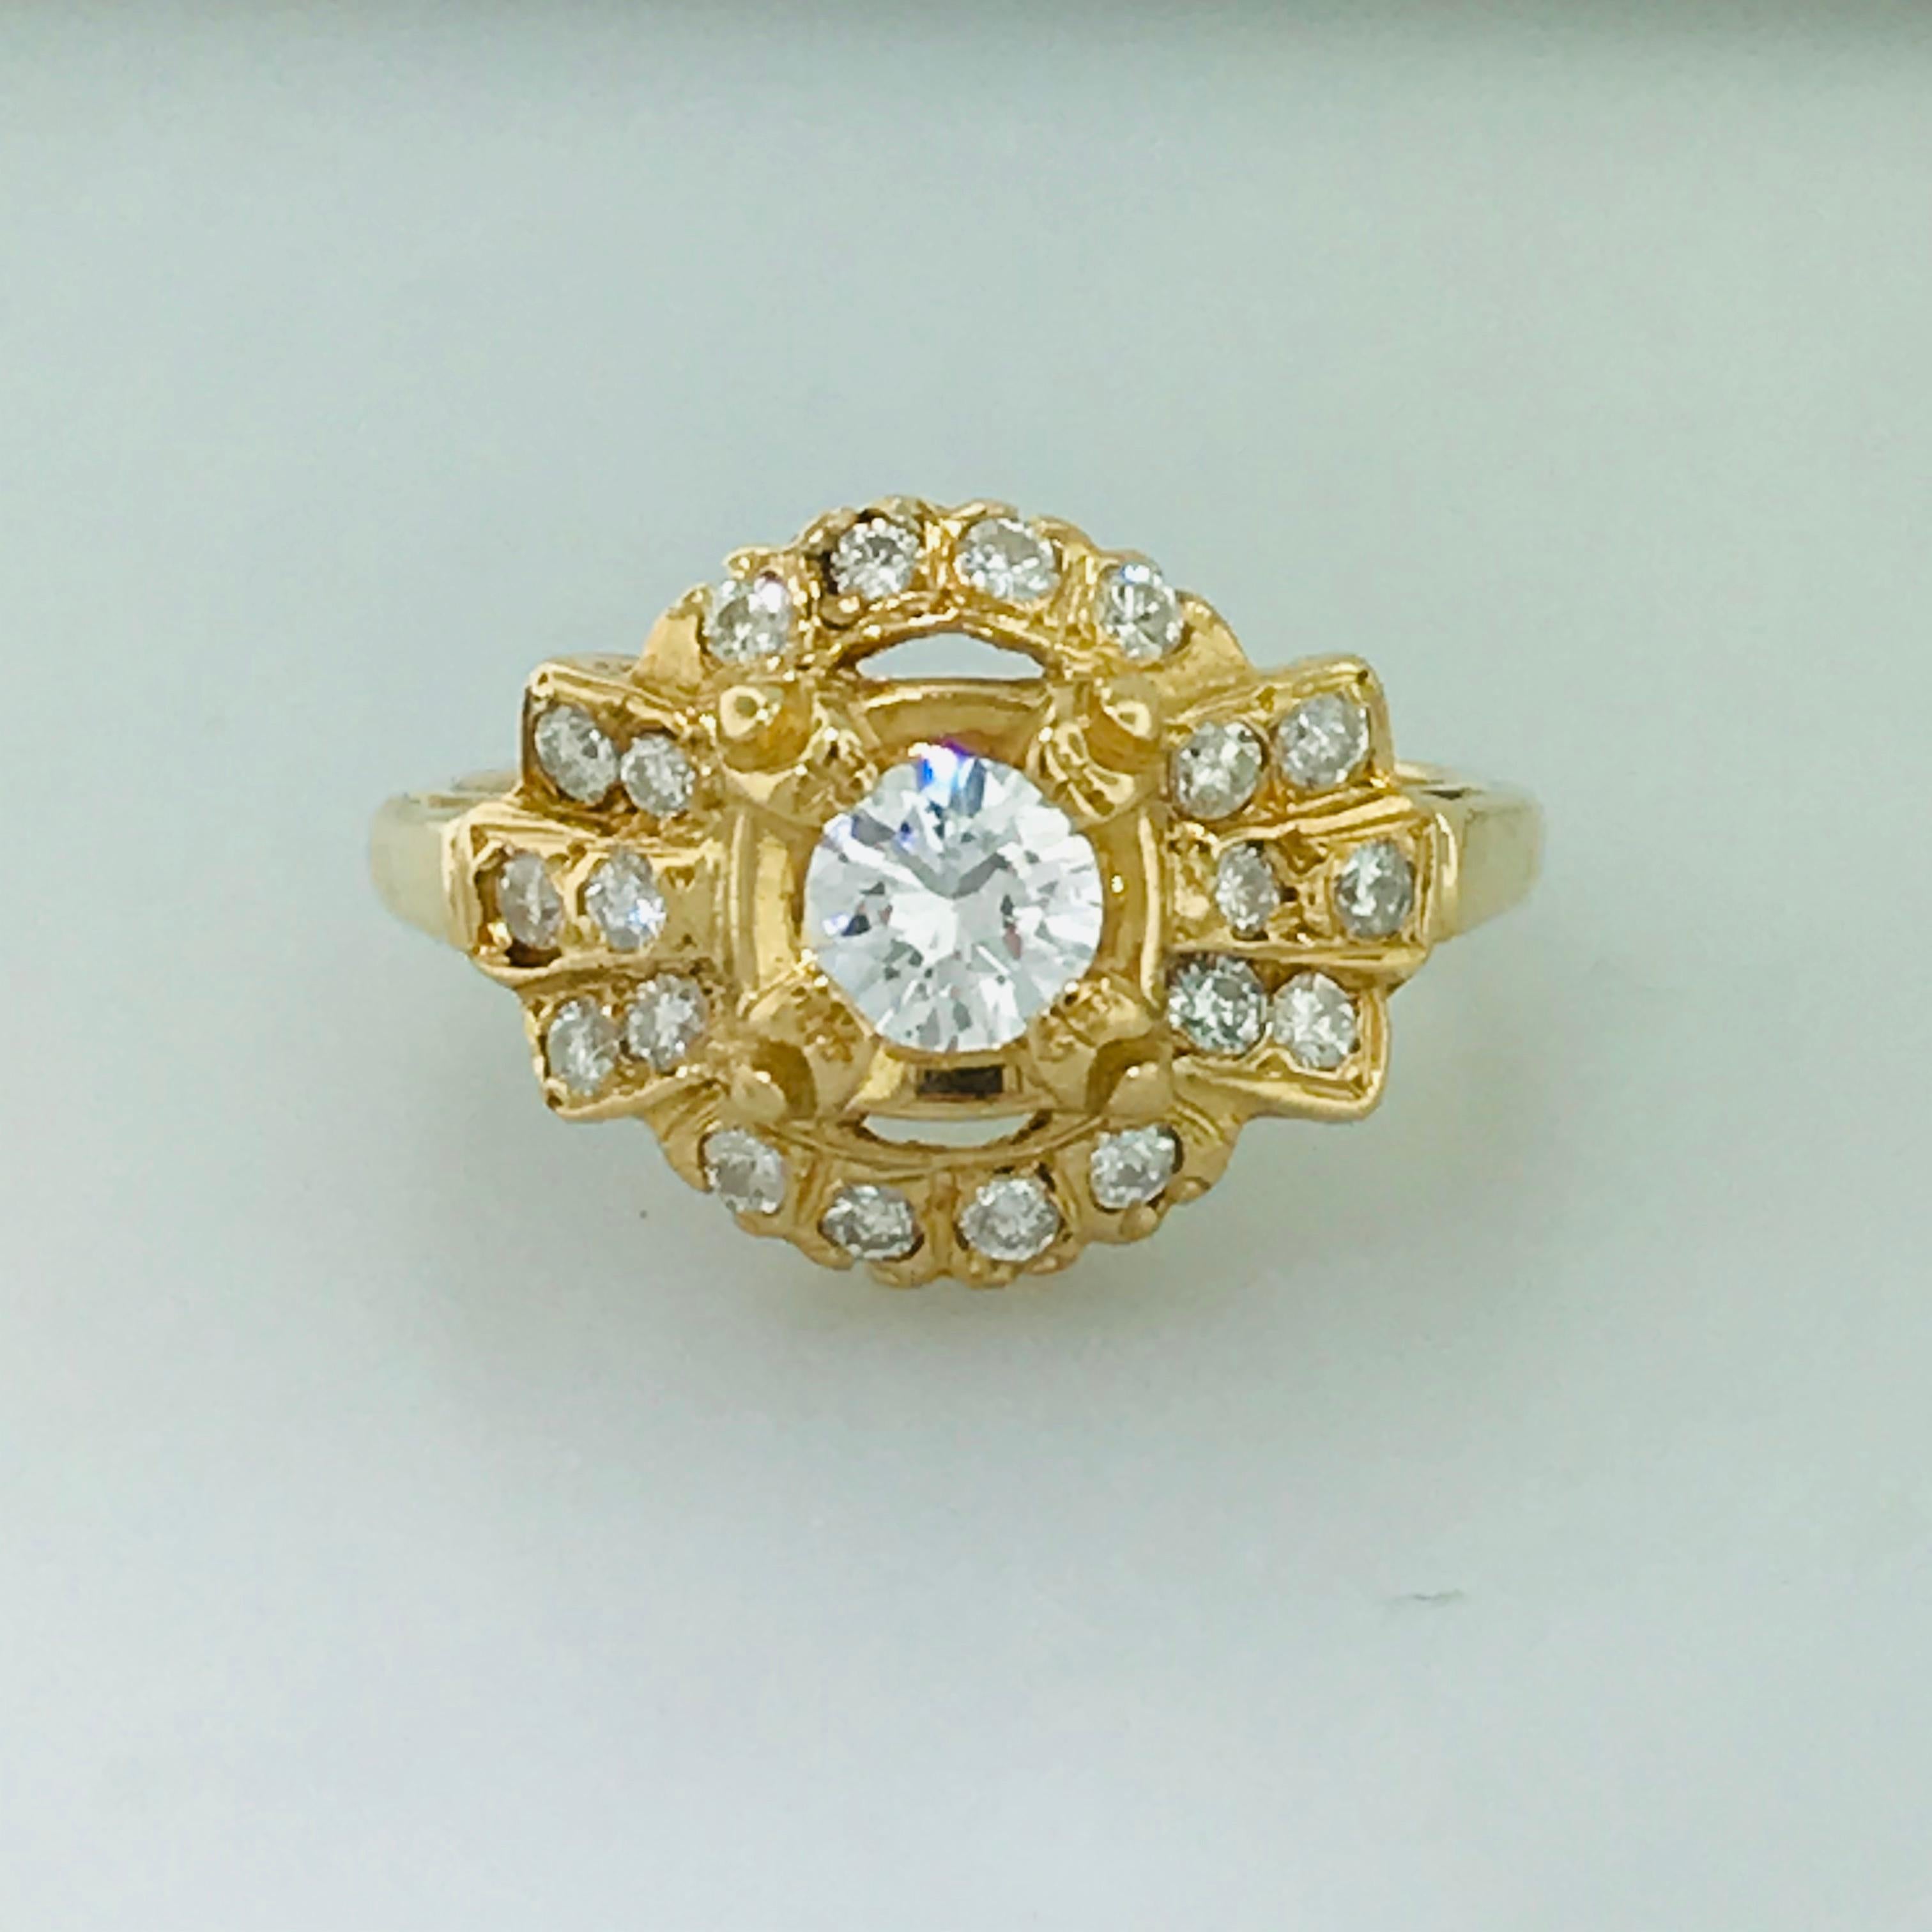 A Rare Find - CIRCA 1935 Diamond Engagement Ring in Great Condition! 
This Estate, vintage engagement ring has a beautiful setting that is very unique. With a round diamond set in the center, framed by a round diamond 